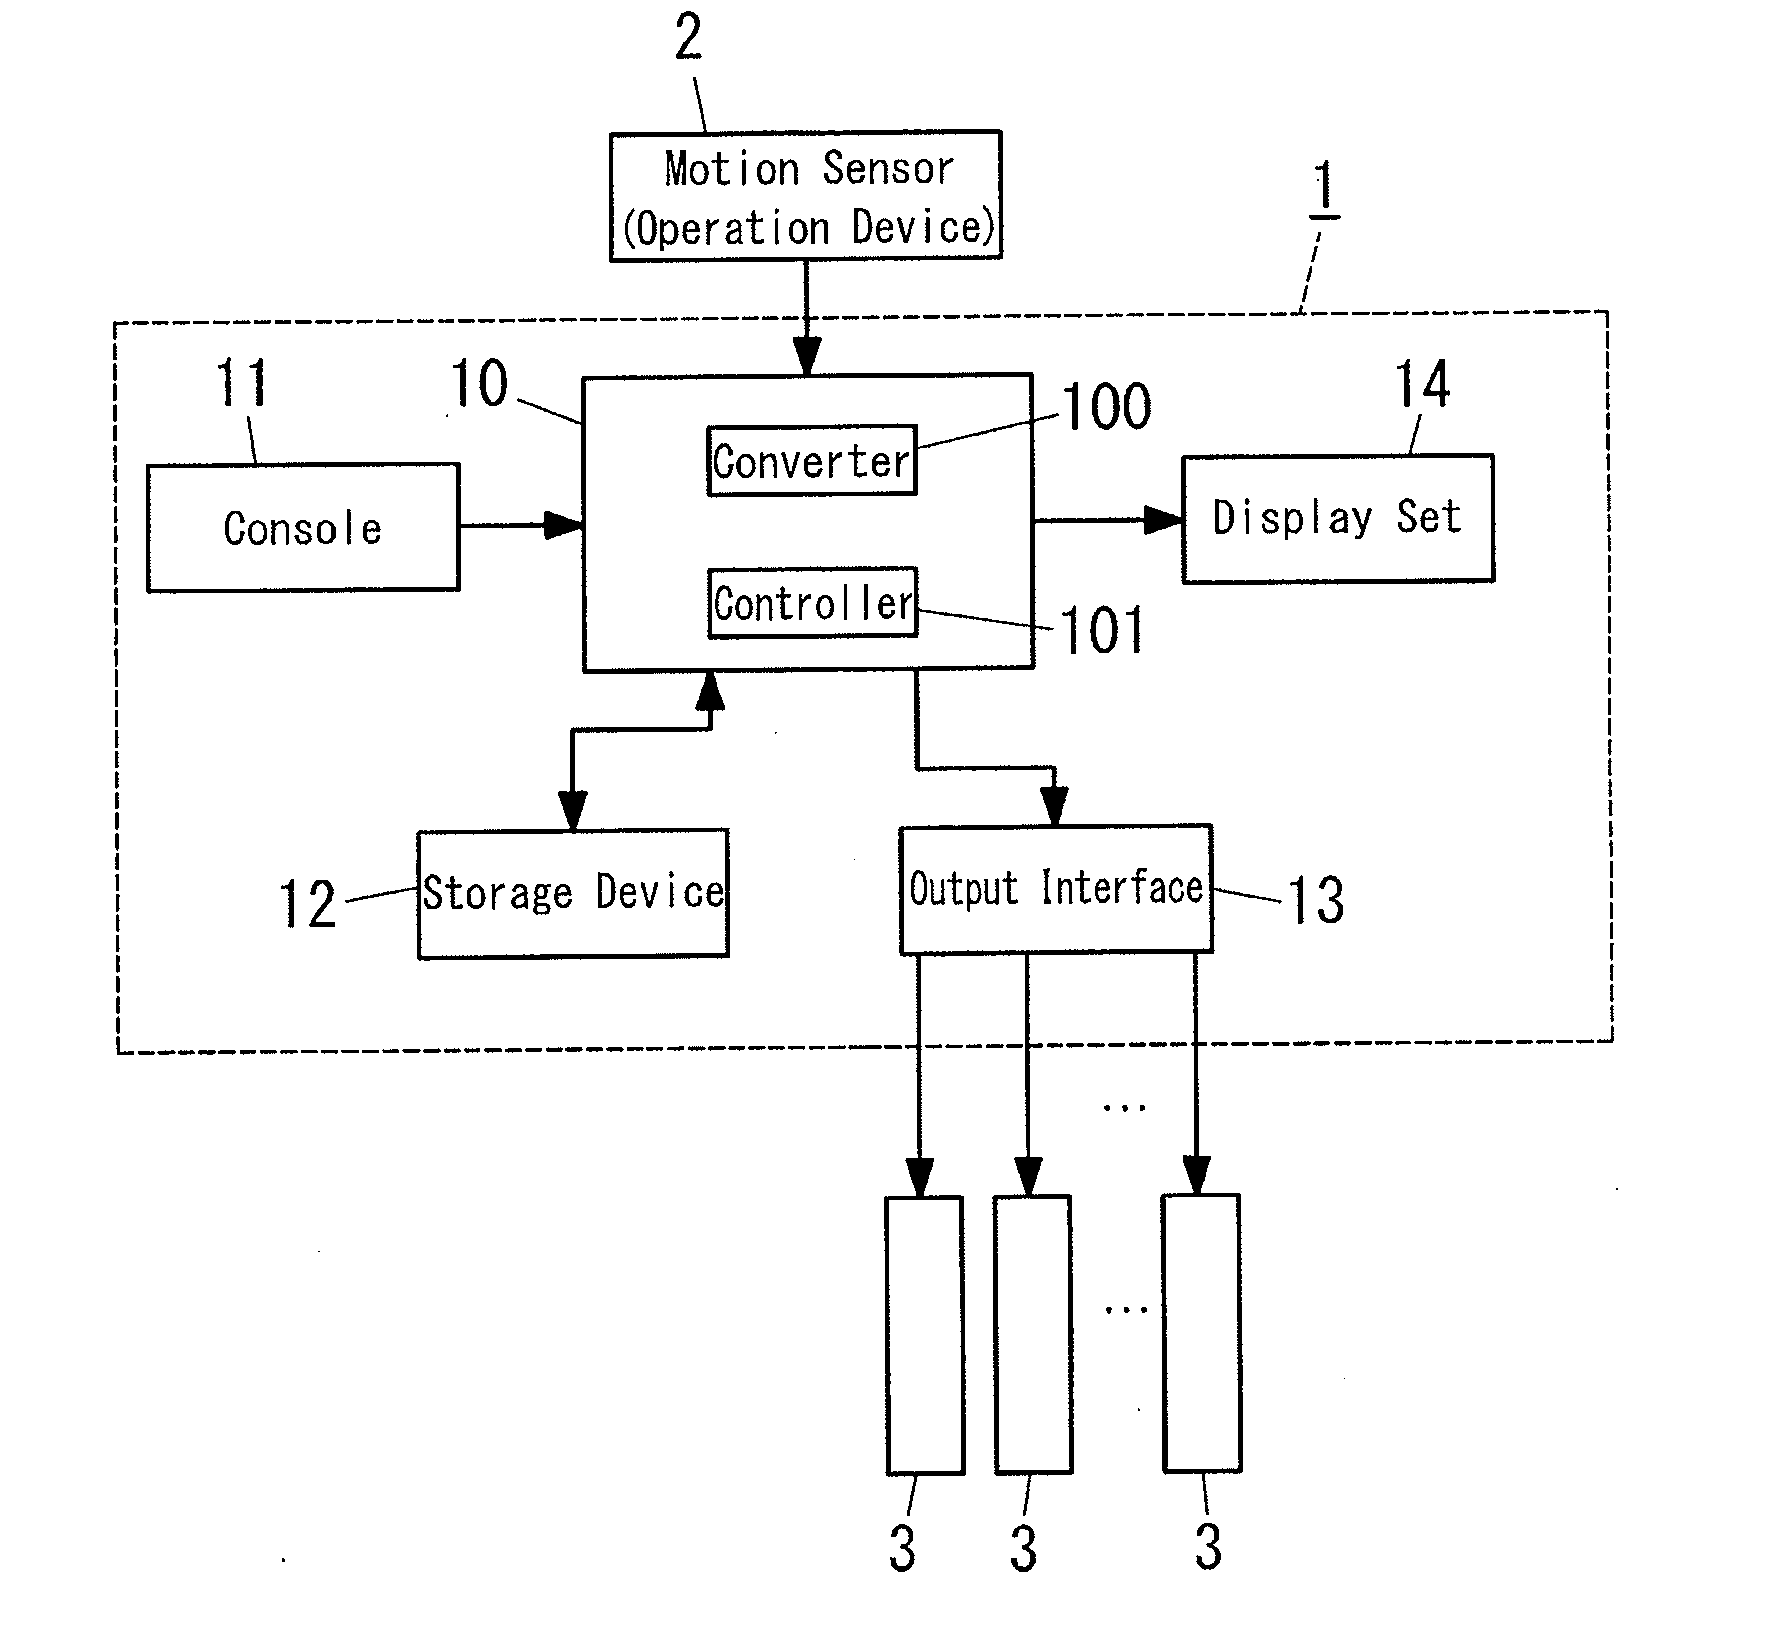 Lighting control console and lighting control system